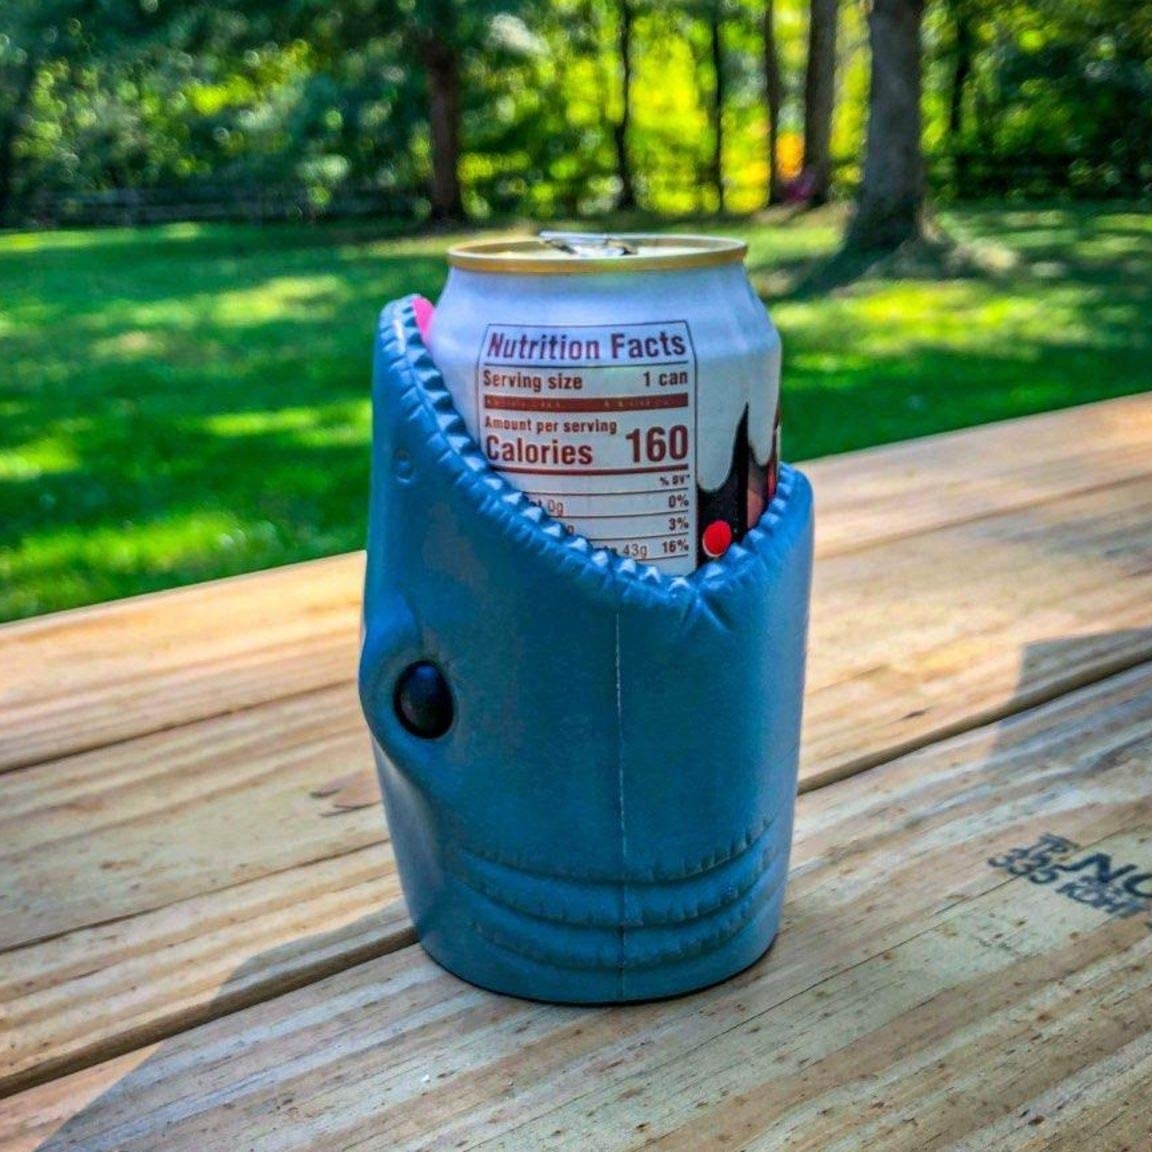 Shark mouth-shaped can holder with soda can inside of it on a picnic table